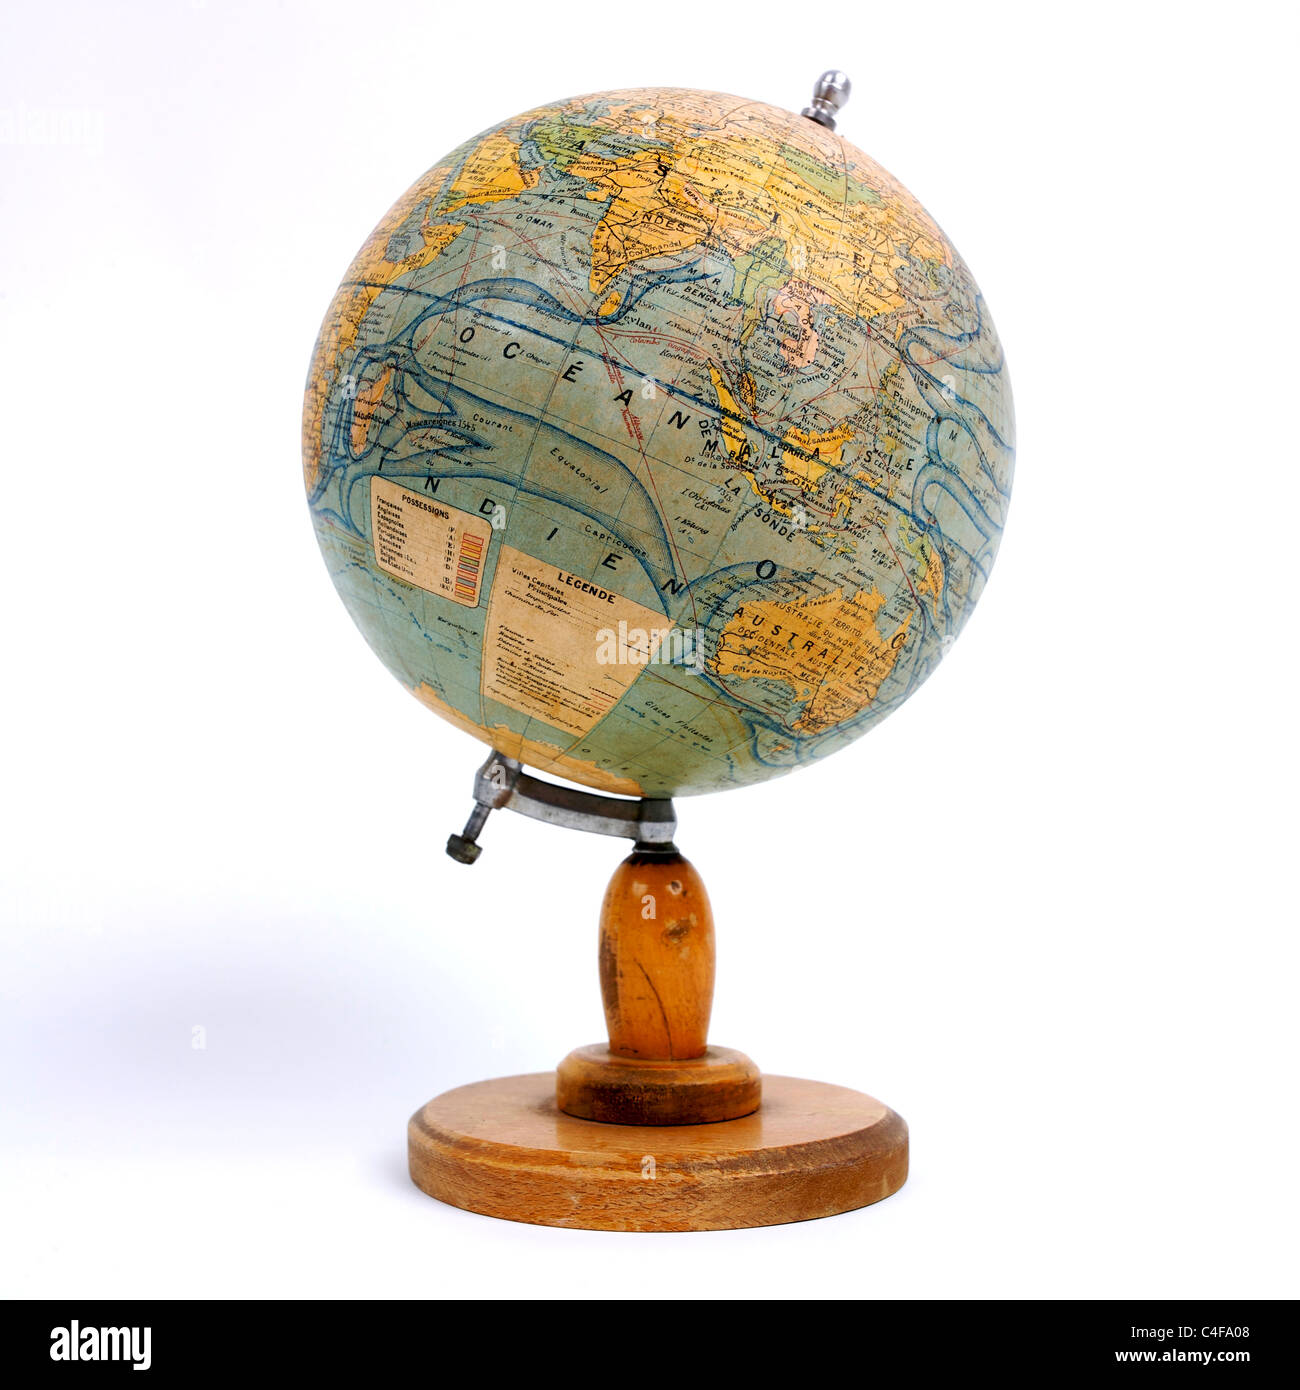 An old fashioned globe. Stock Photo